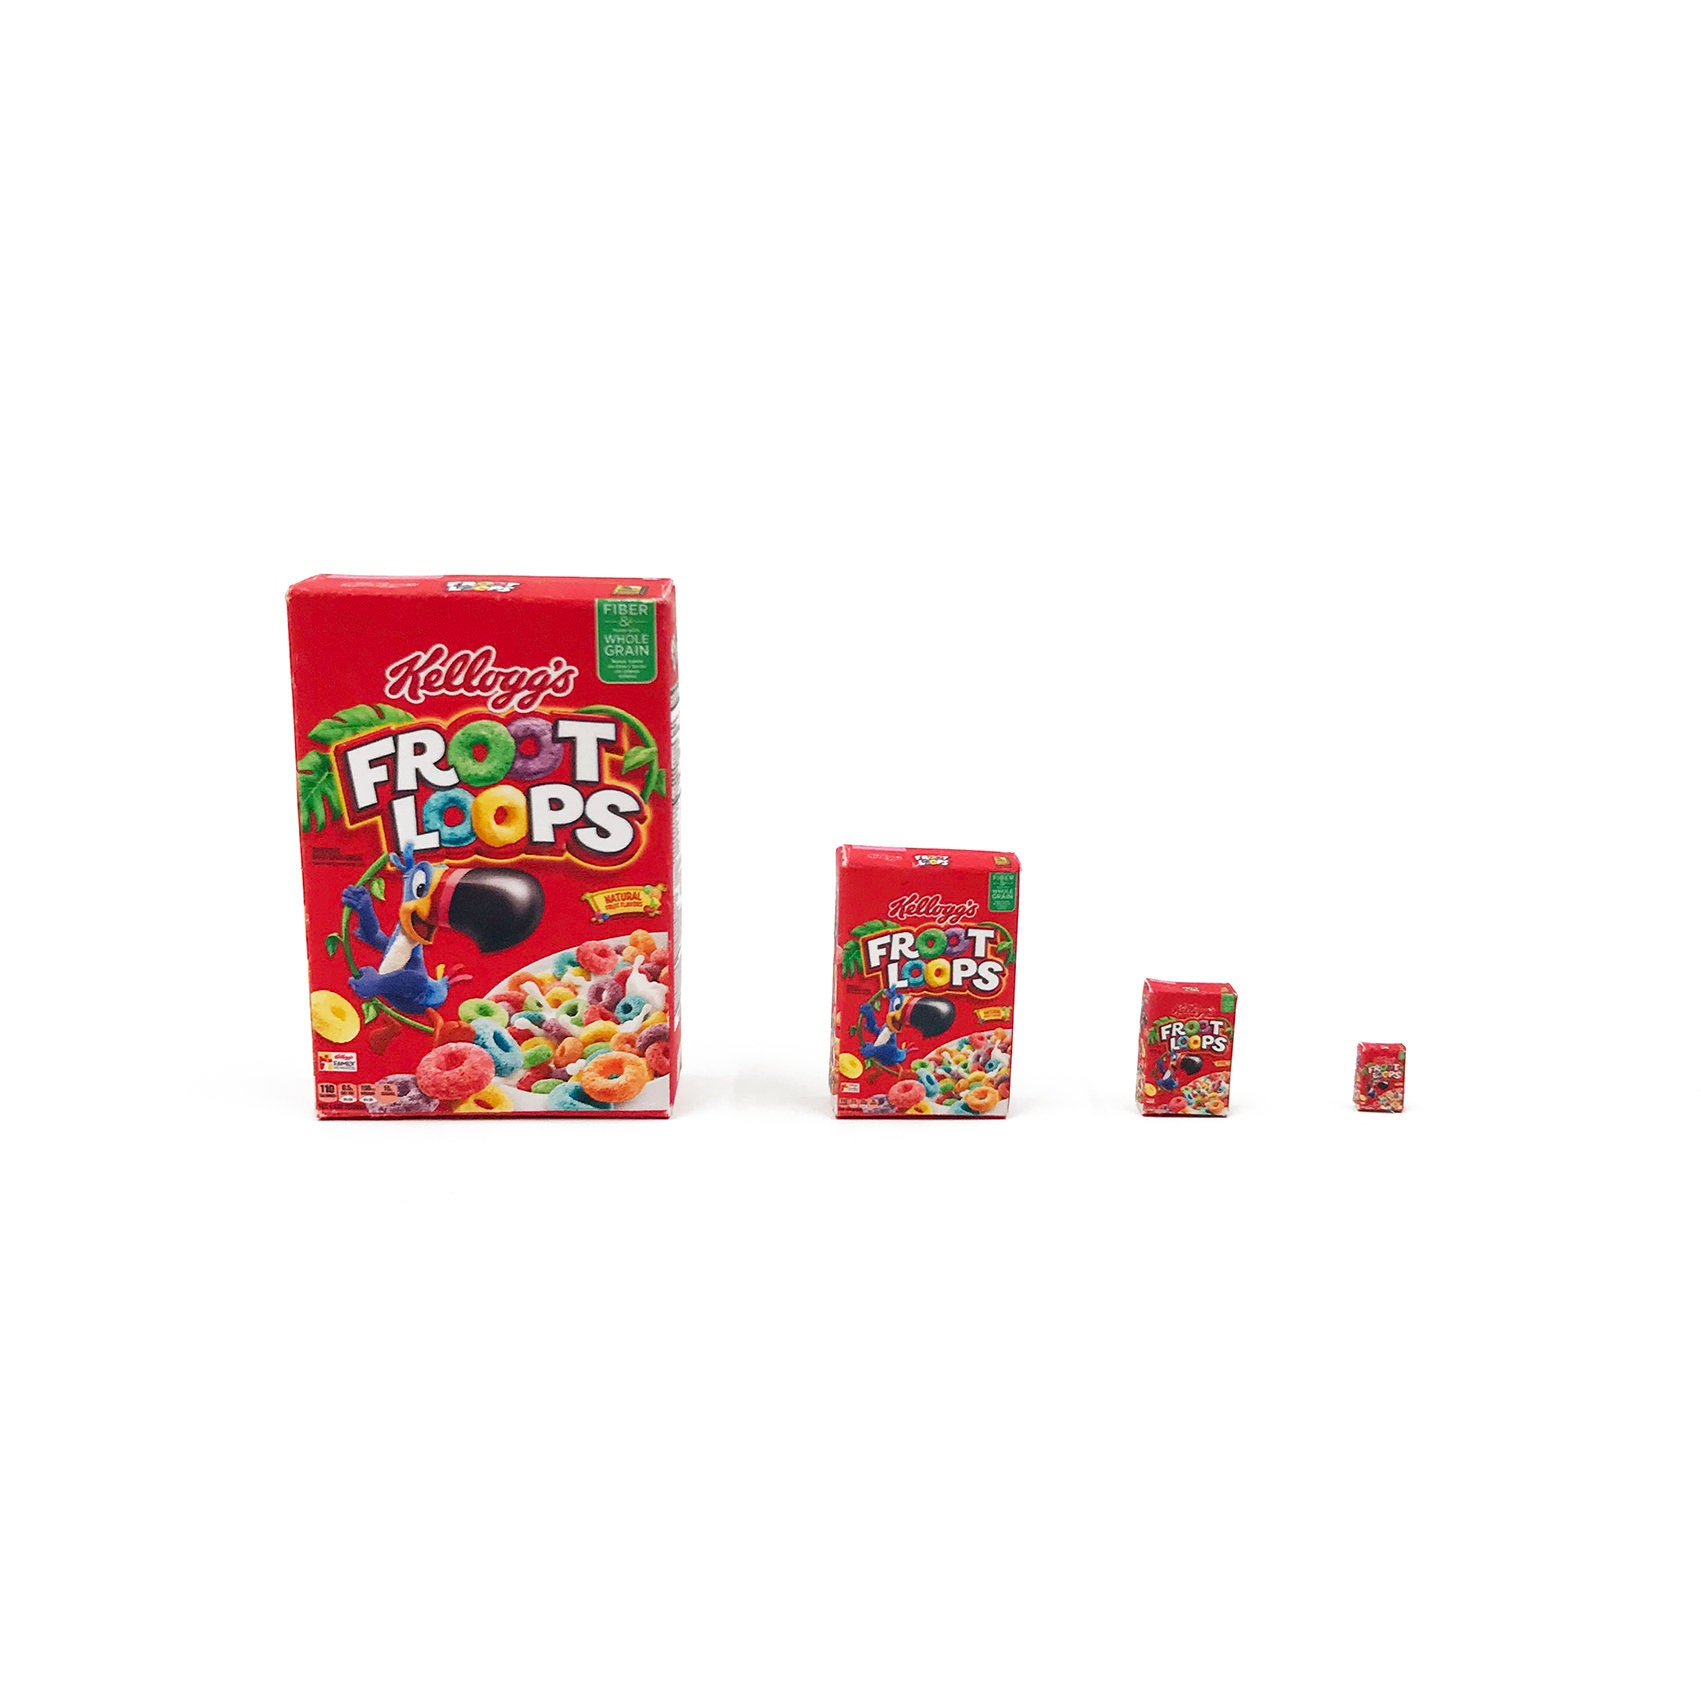 Miniature Froot Loops Cereal Box 